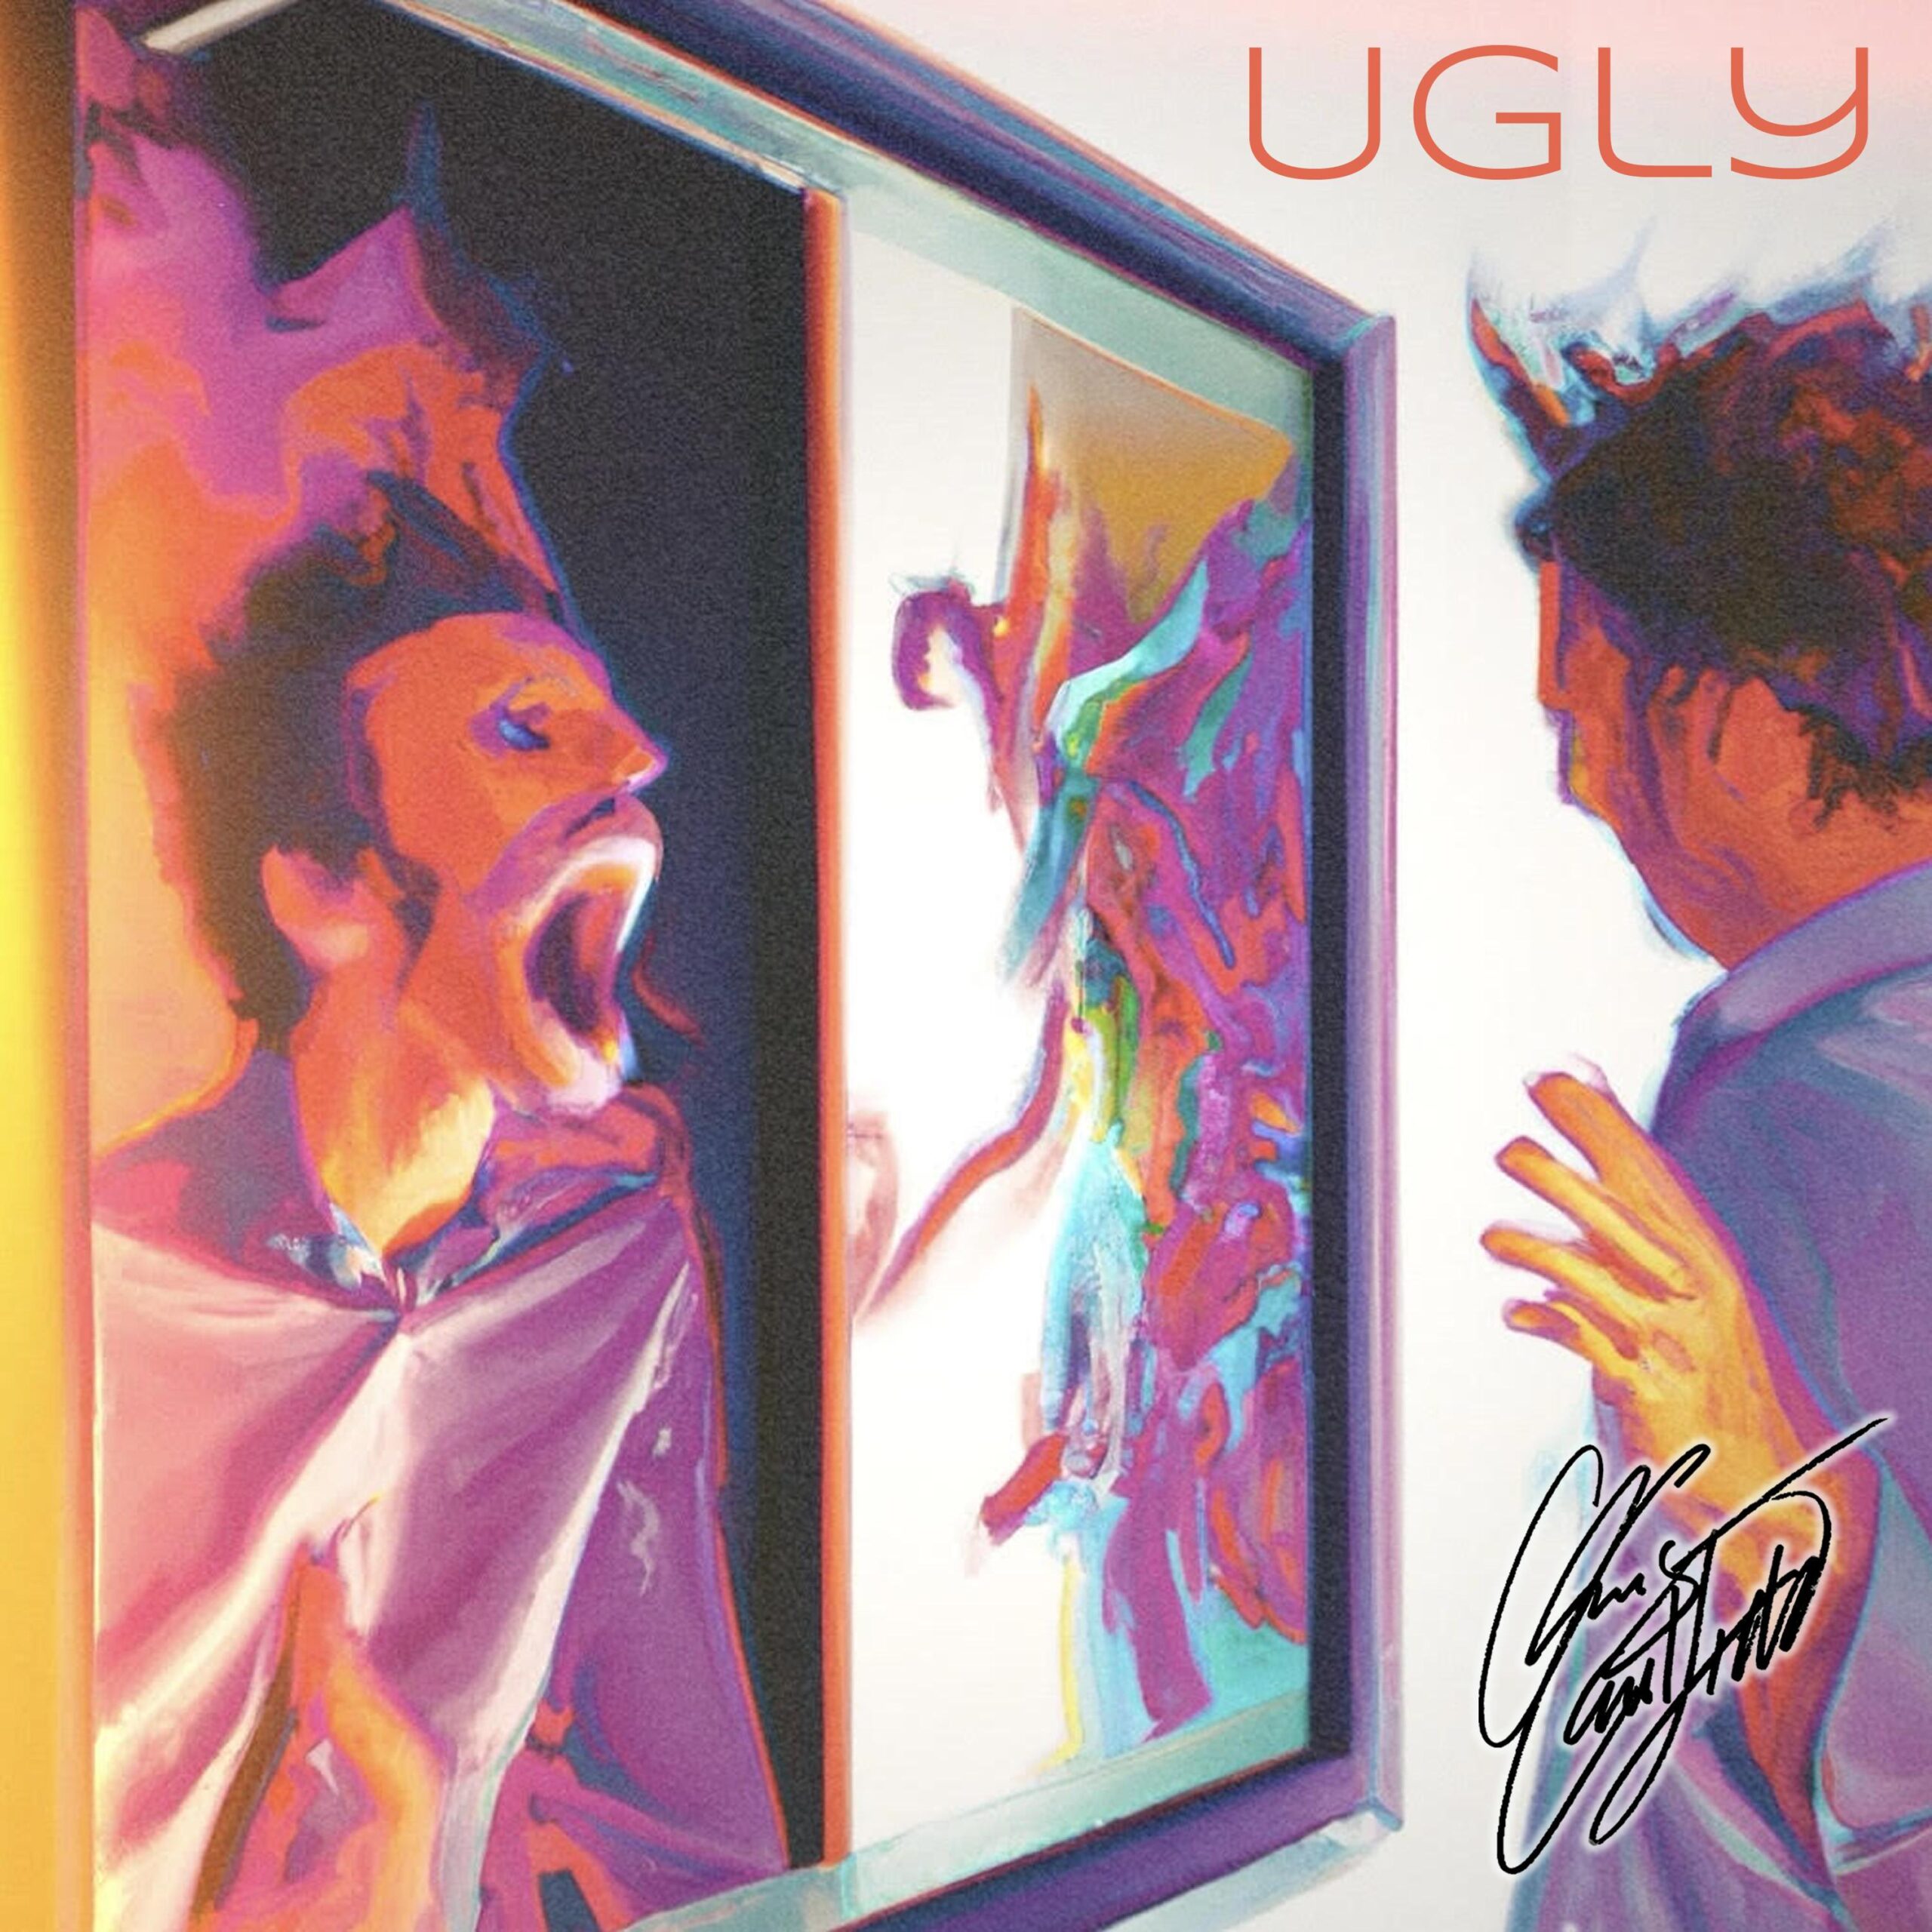 Official Artwork for Ugly by Chris Caulfield